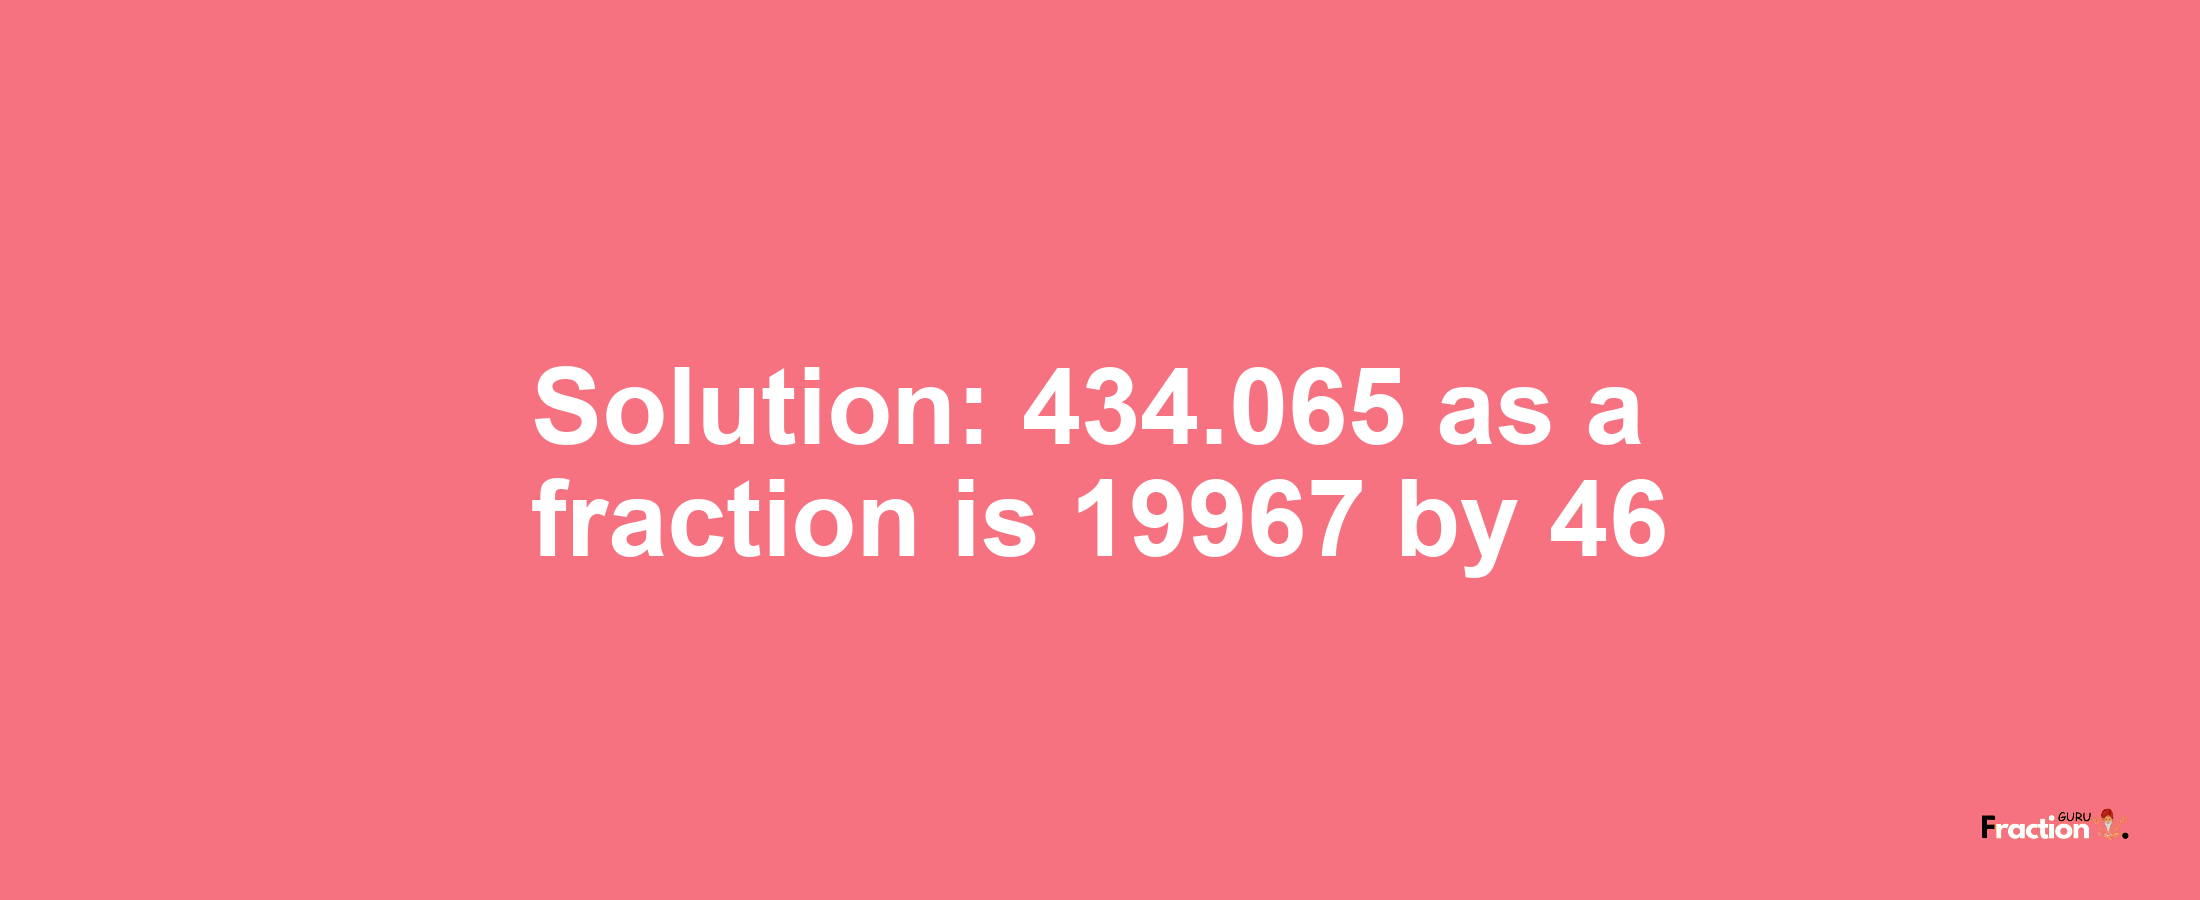 Solution:434.065 as a fraction is 19967/46